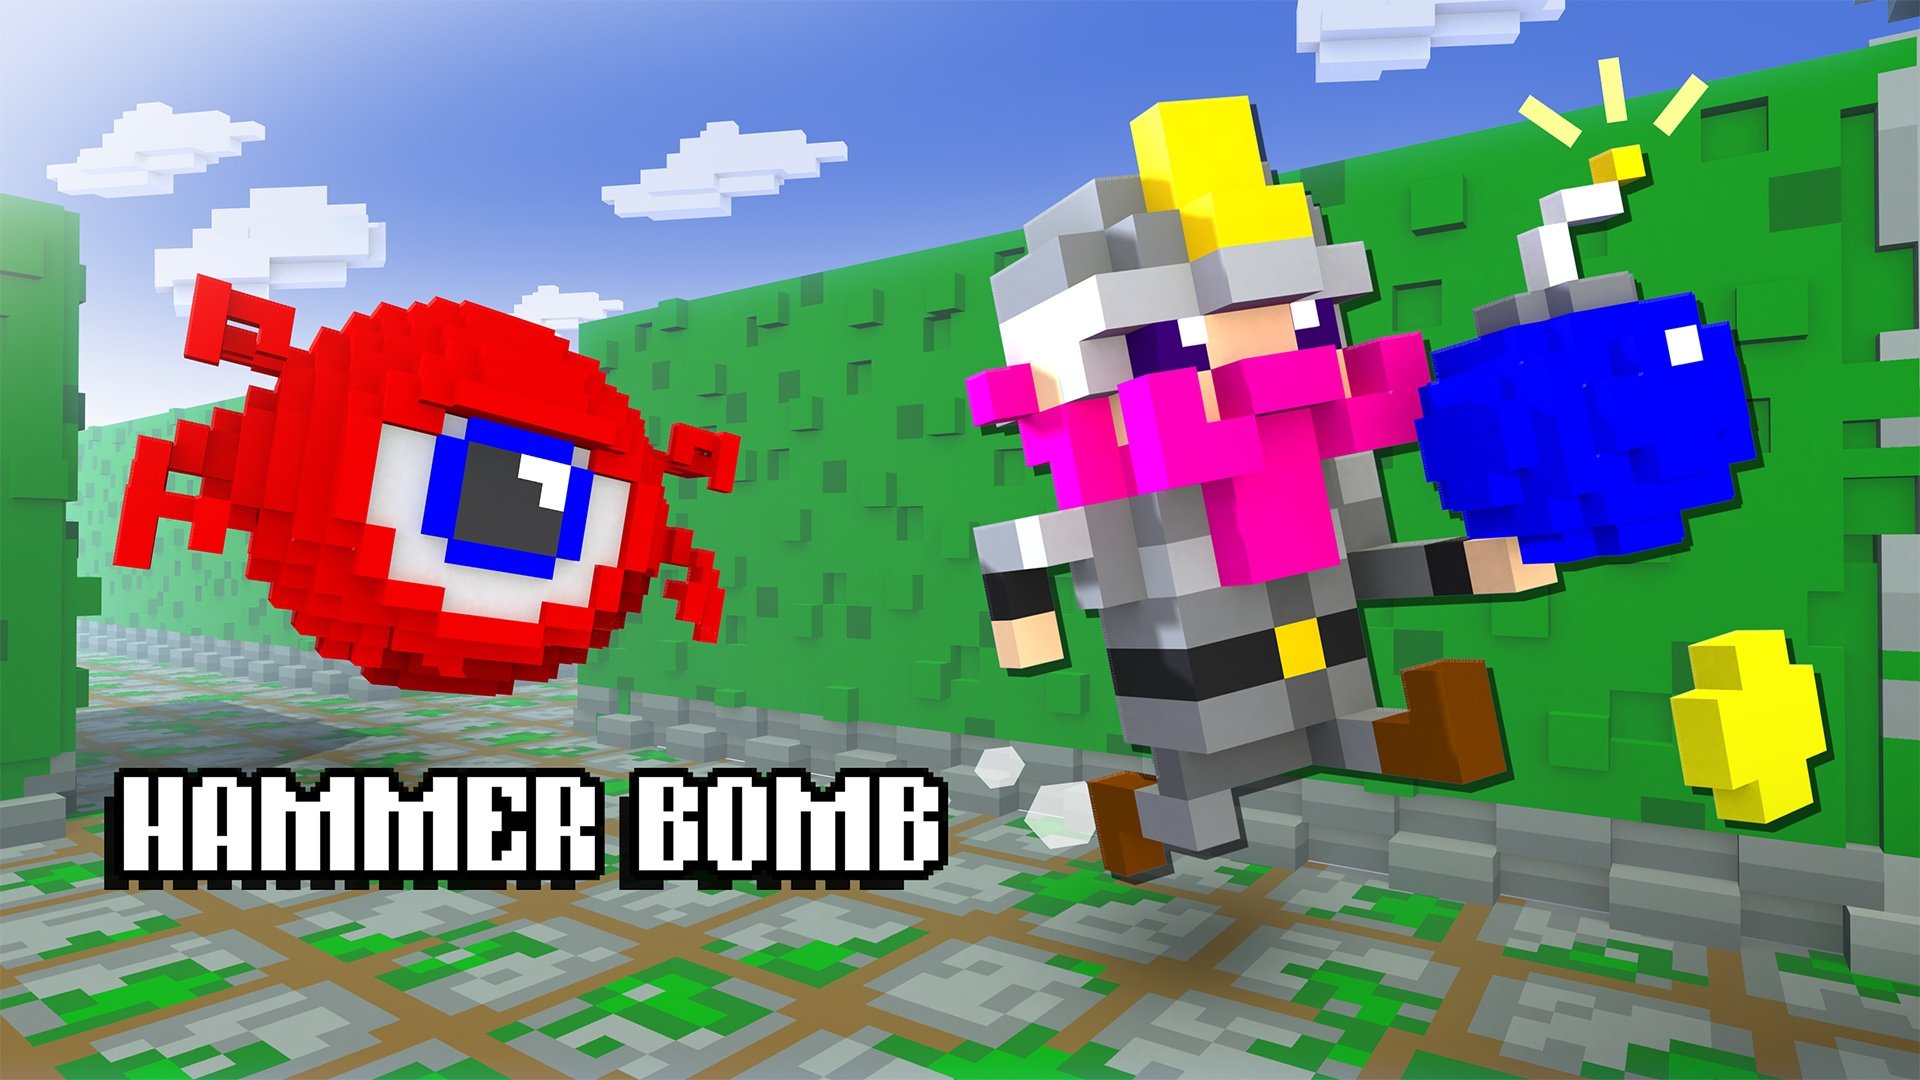 Hammer Bomb Review: Nailed It